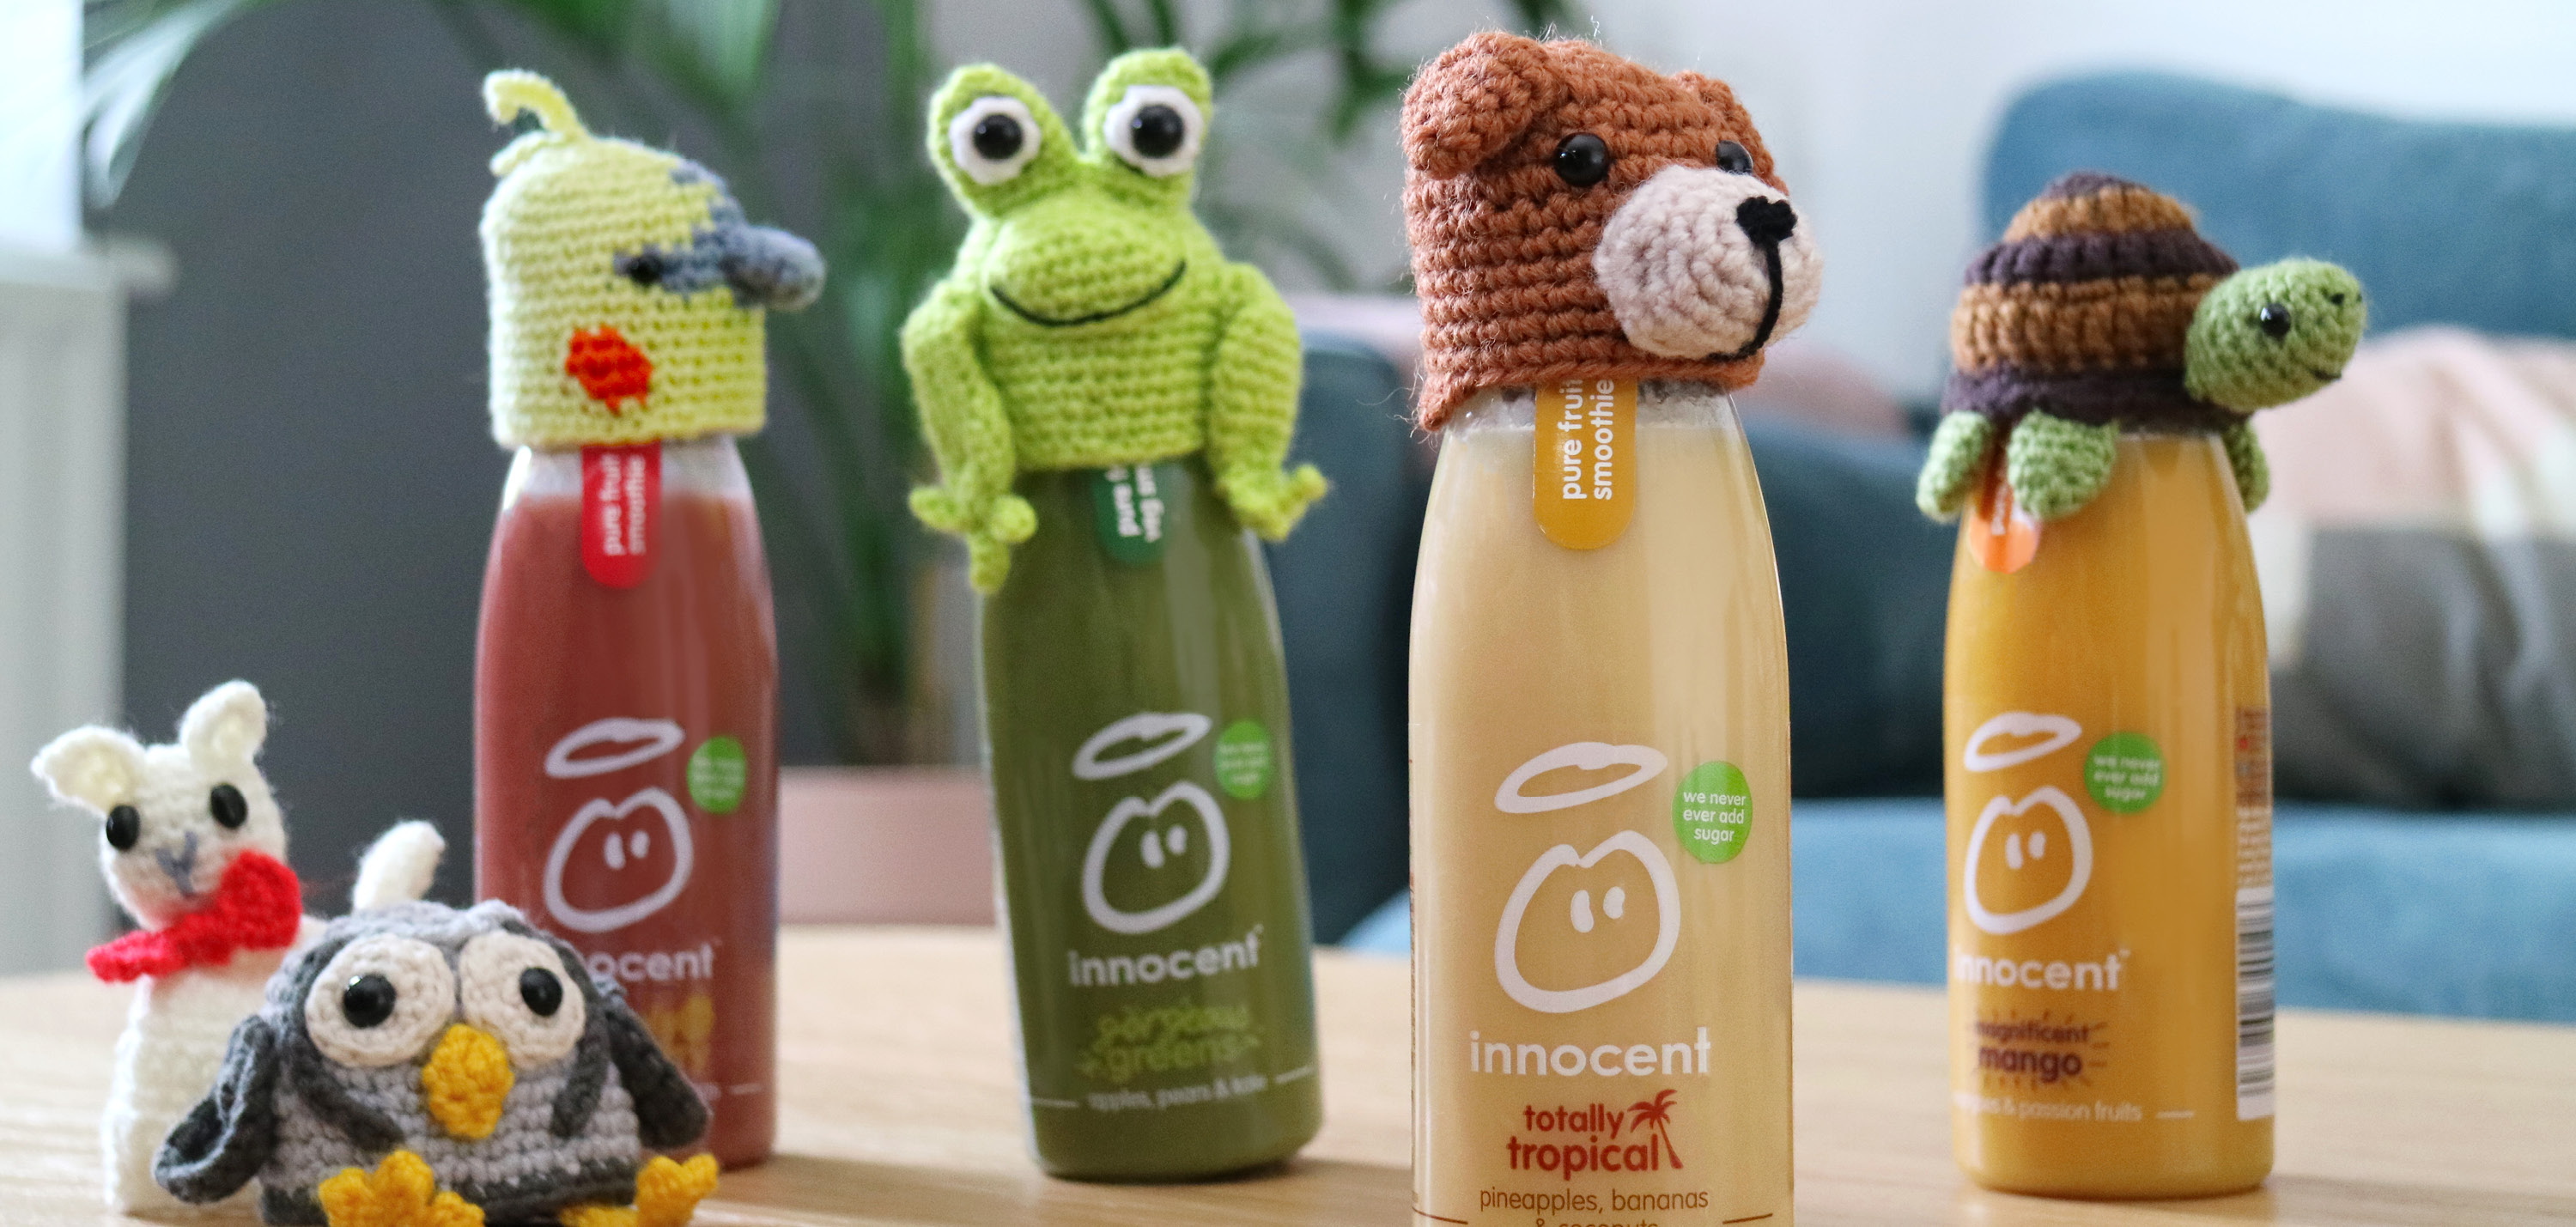 Join us to knit little hats for innocent smoothie bottles and help raise money to support local older people.